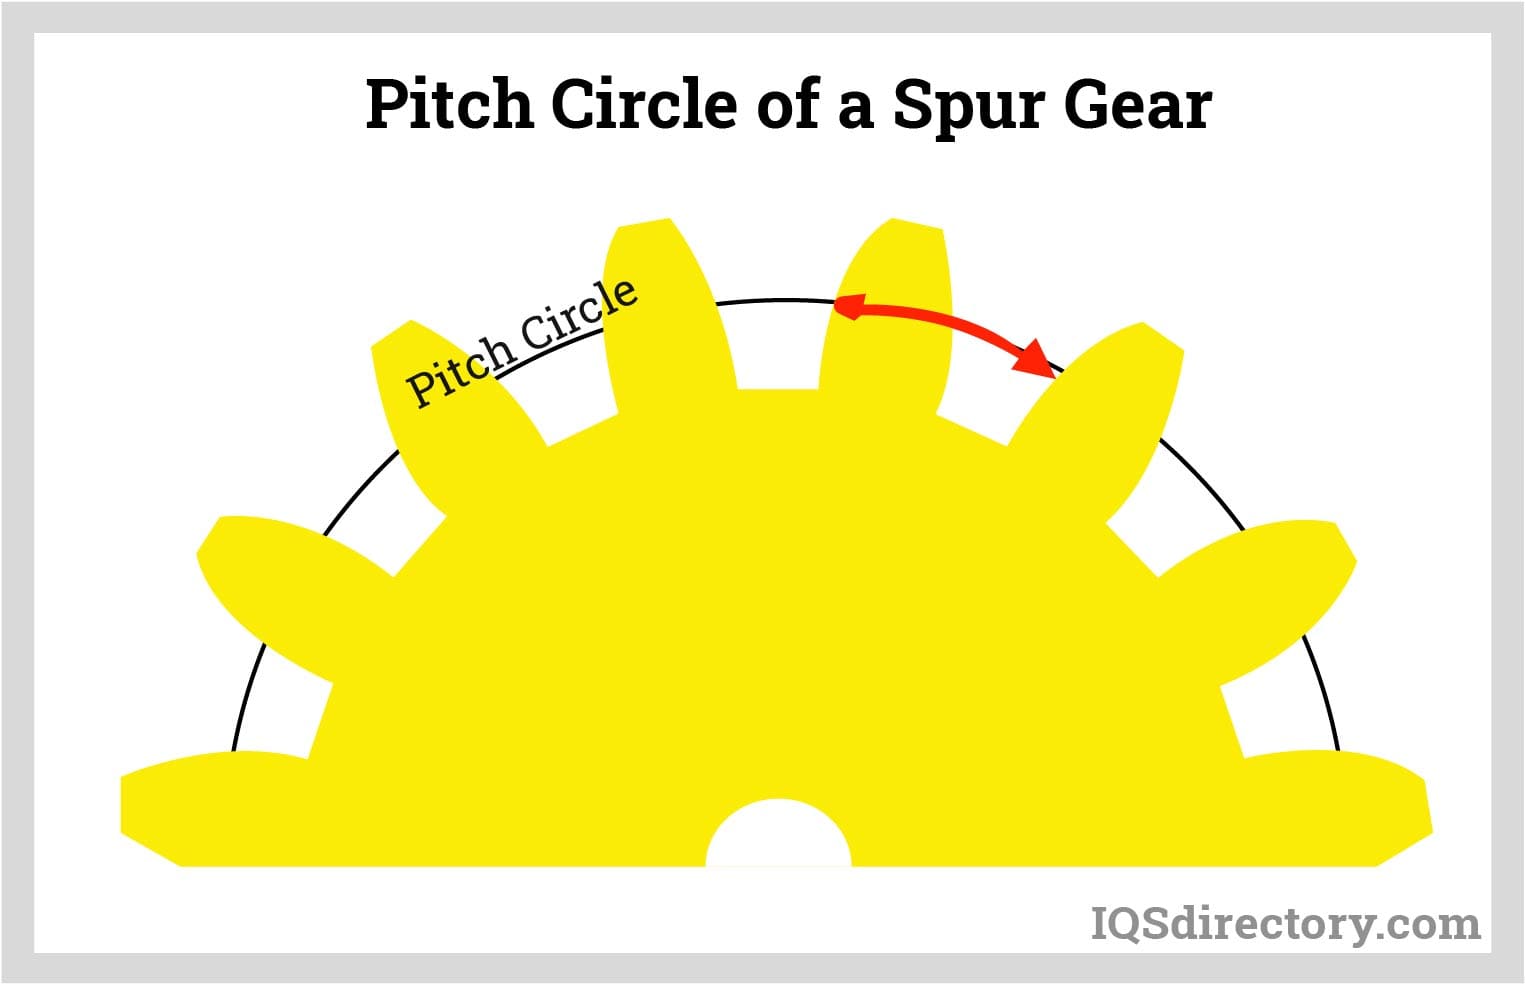 Pitch Circle of a Spur Gear